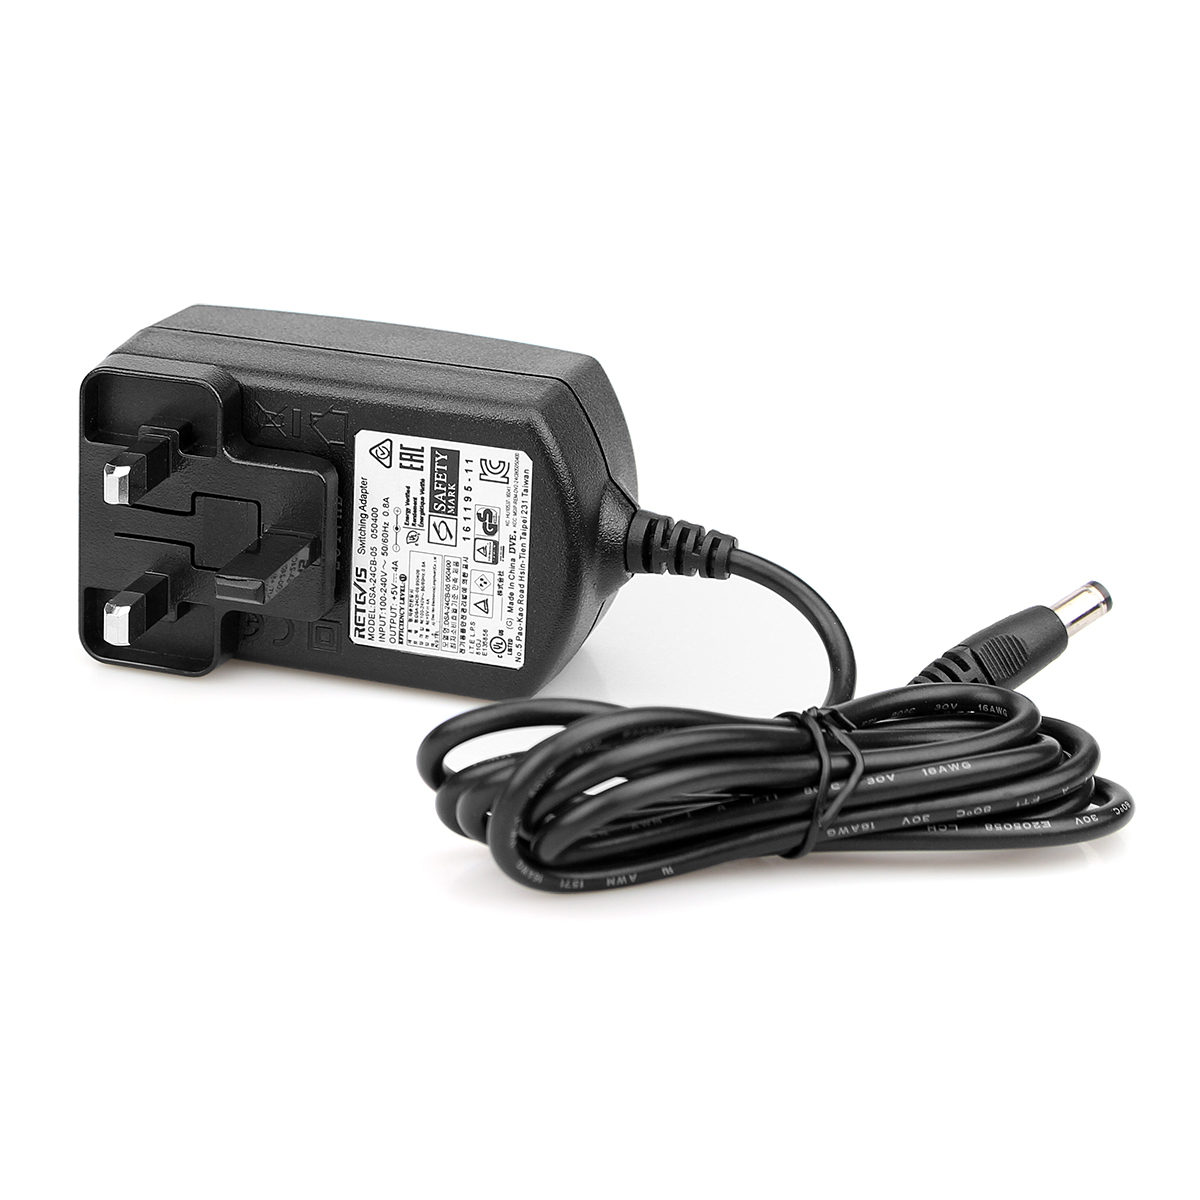 RTC22 6-Bank Multi-Charger for Retevis RT22 RB19 RB619 UK Plug